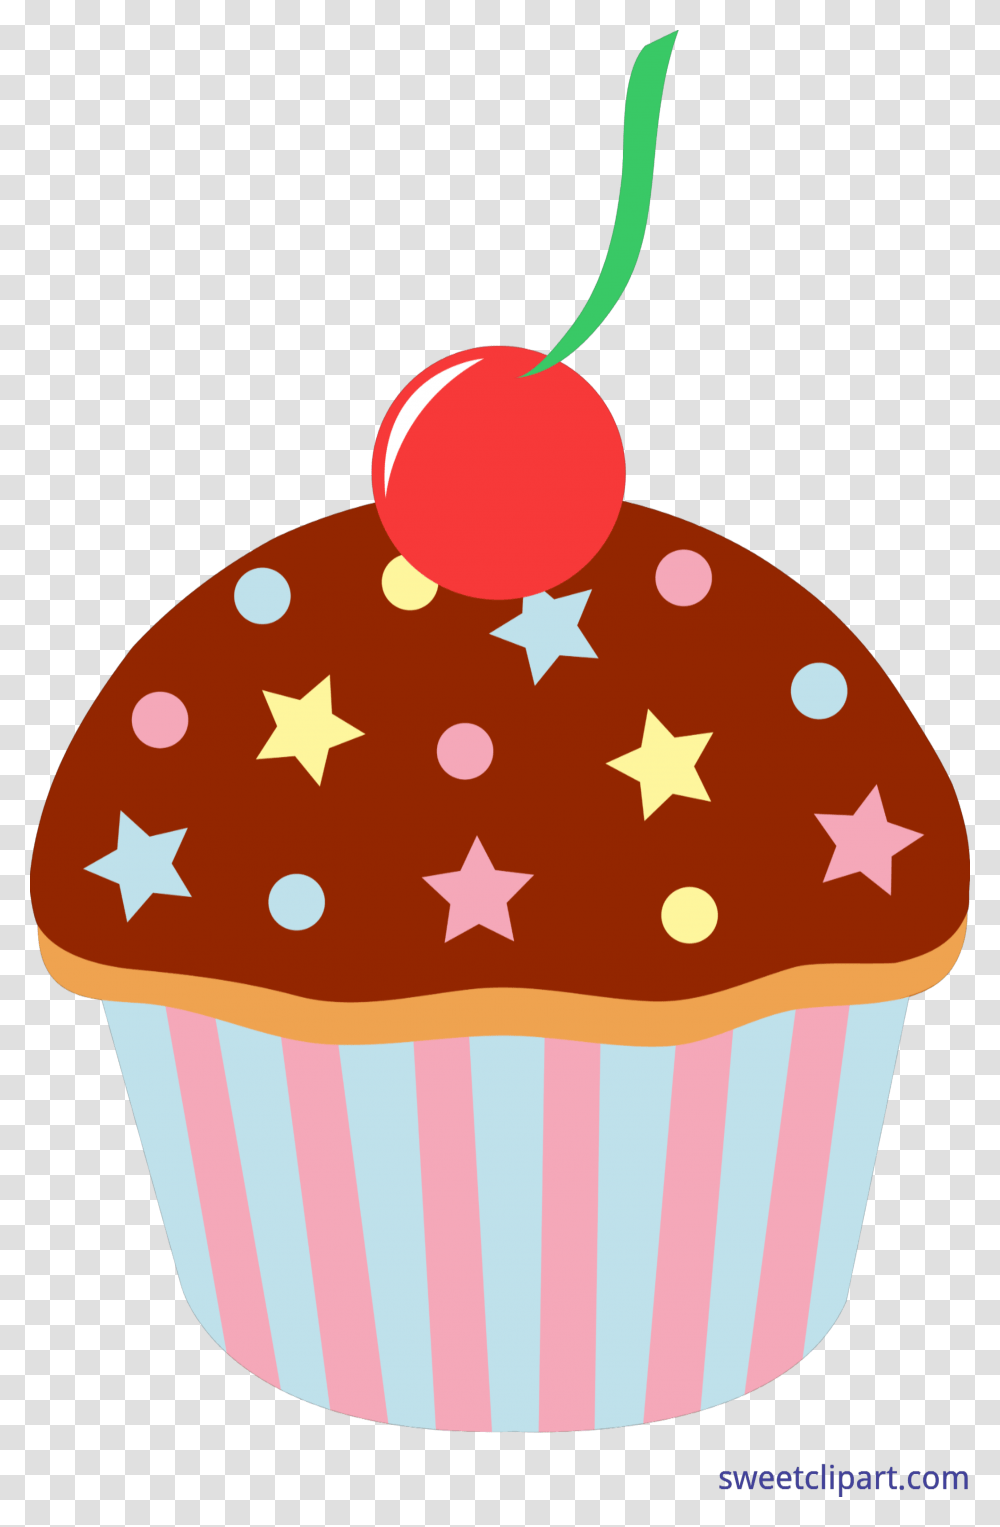 Vector Cupcakes Sprinkle Clipart Cartoon Cakes And Sweets, Cream, Dessert, Food, Creme Transparent Png